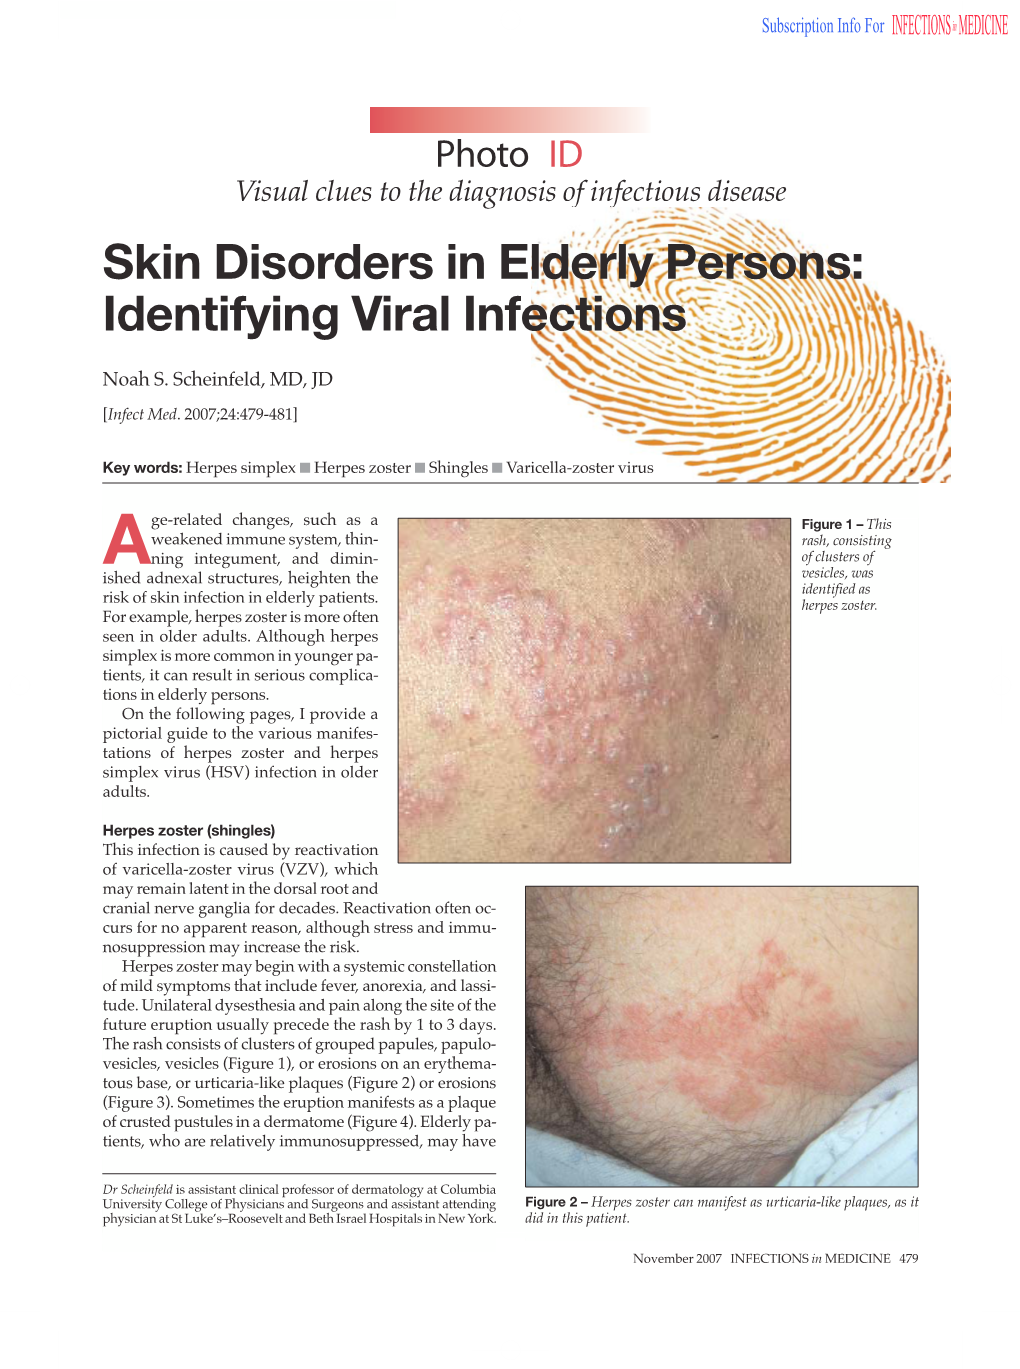 Skin Disorders in Elderly Persons: Identifying Viral Infections